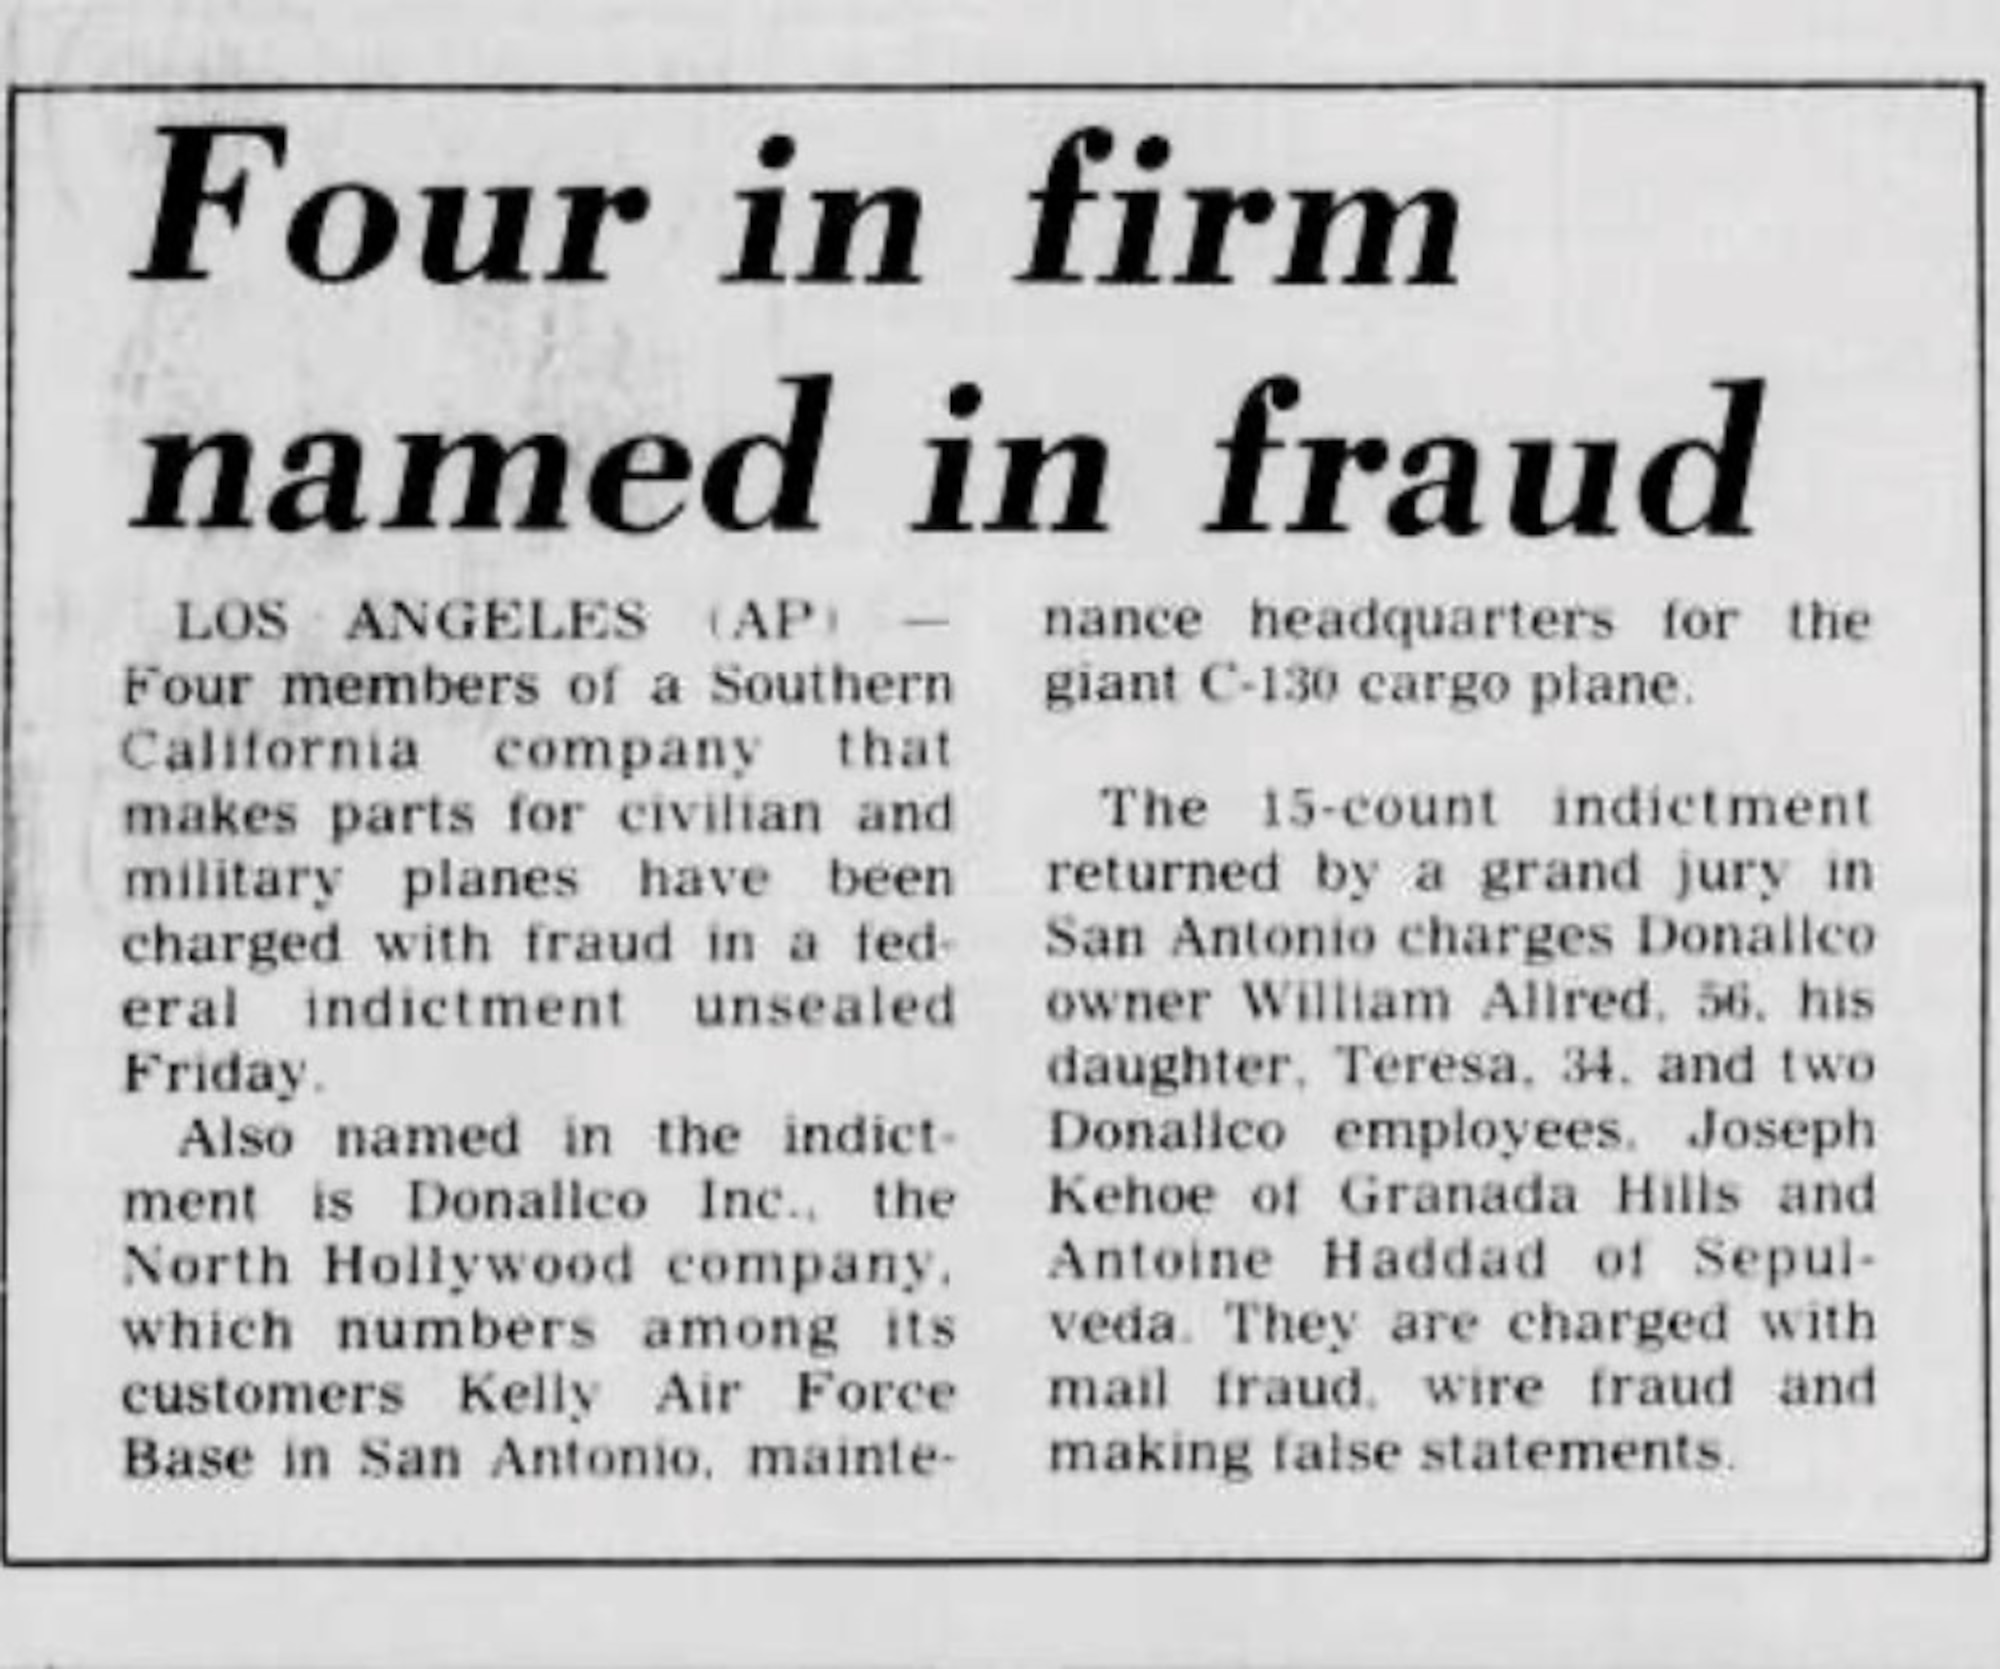 By 1987, Office of Special Investigations' Operation EAGLE FLIGHT actions led to multiple company indictments to include Donallco Inc., employees being indicted on mail fraud, wire fraud and making false statements. Pictured is a Jan. 31, 1987 newspaper article regarding the fraud scheme. (Port Arthur News Newspaper)